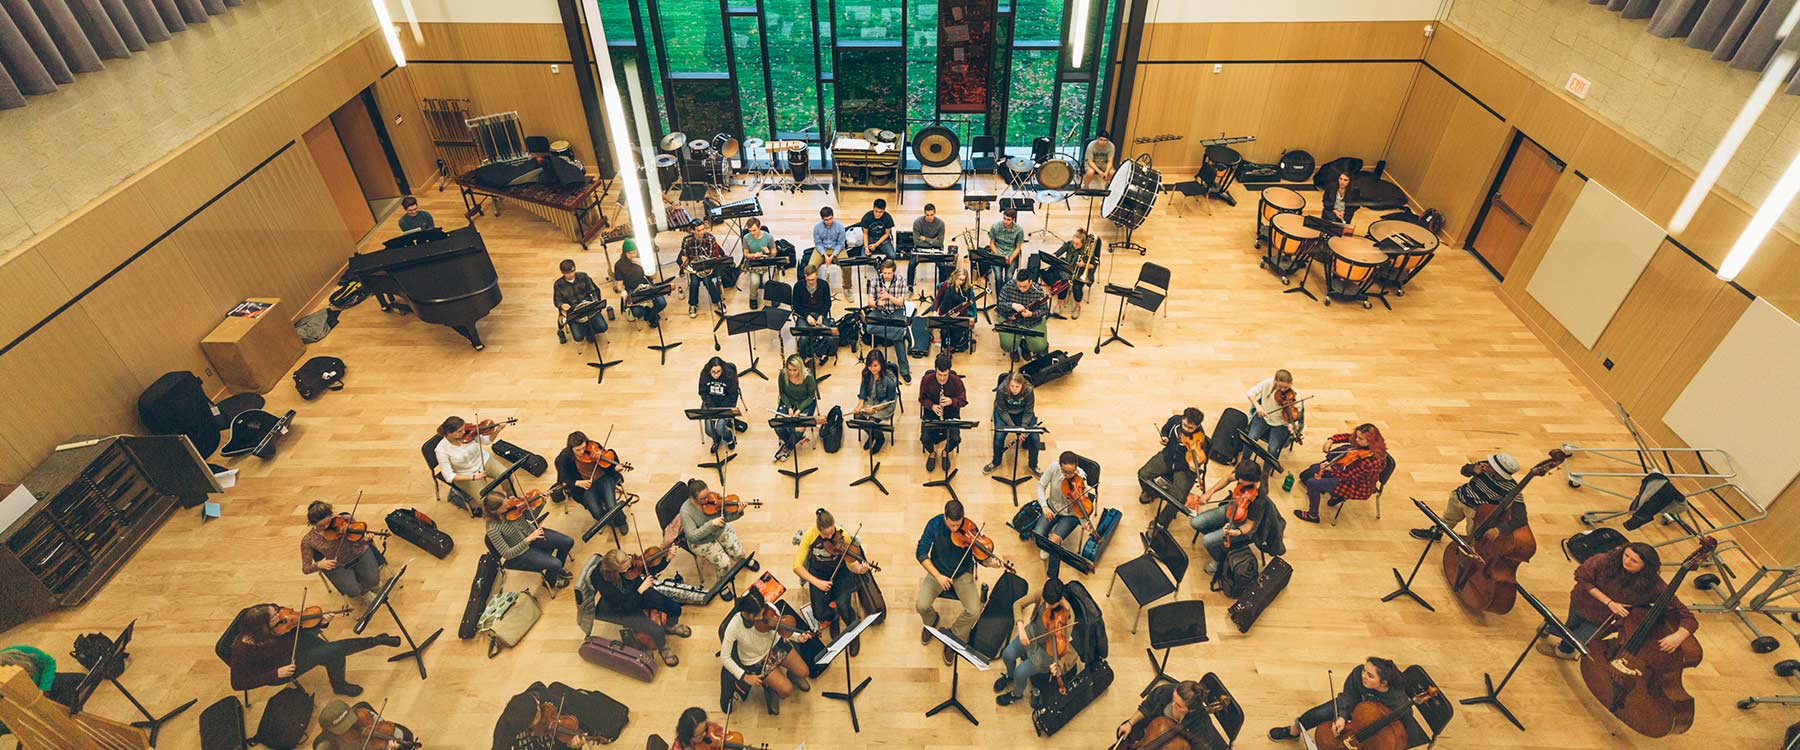 A view from the ceiling looking down at students rehearsing in Cowles Music Center.